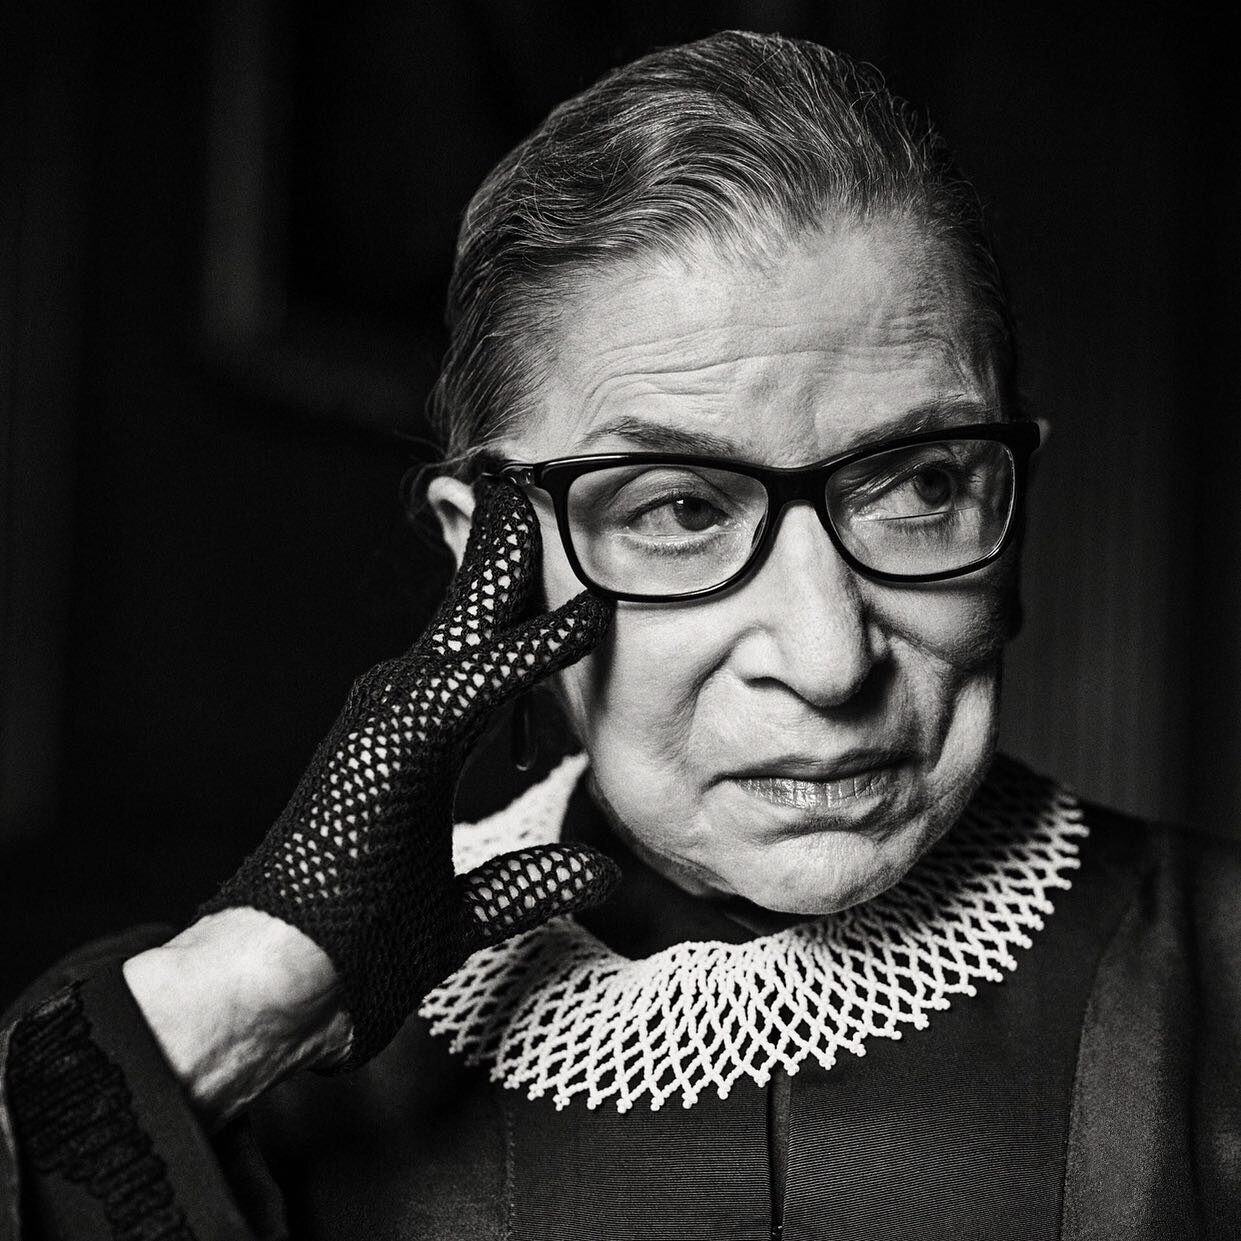 &quot;We're fucked.&quot; 

That&rsquo;s all I could think when word of RBG&rsquo;s passing came down halfway through a virtual Not-Creepy Gathering for NYC. That didn't seem like the hopeful or reassuring thing to say to the group, but it was the on